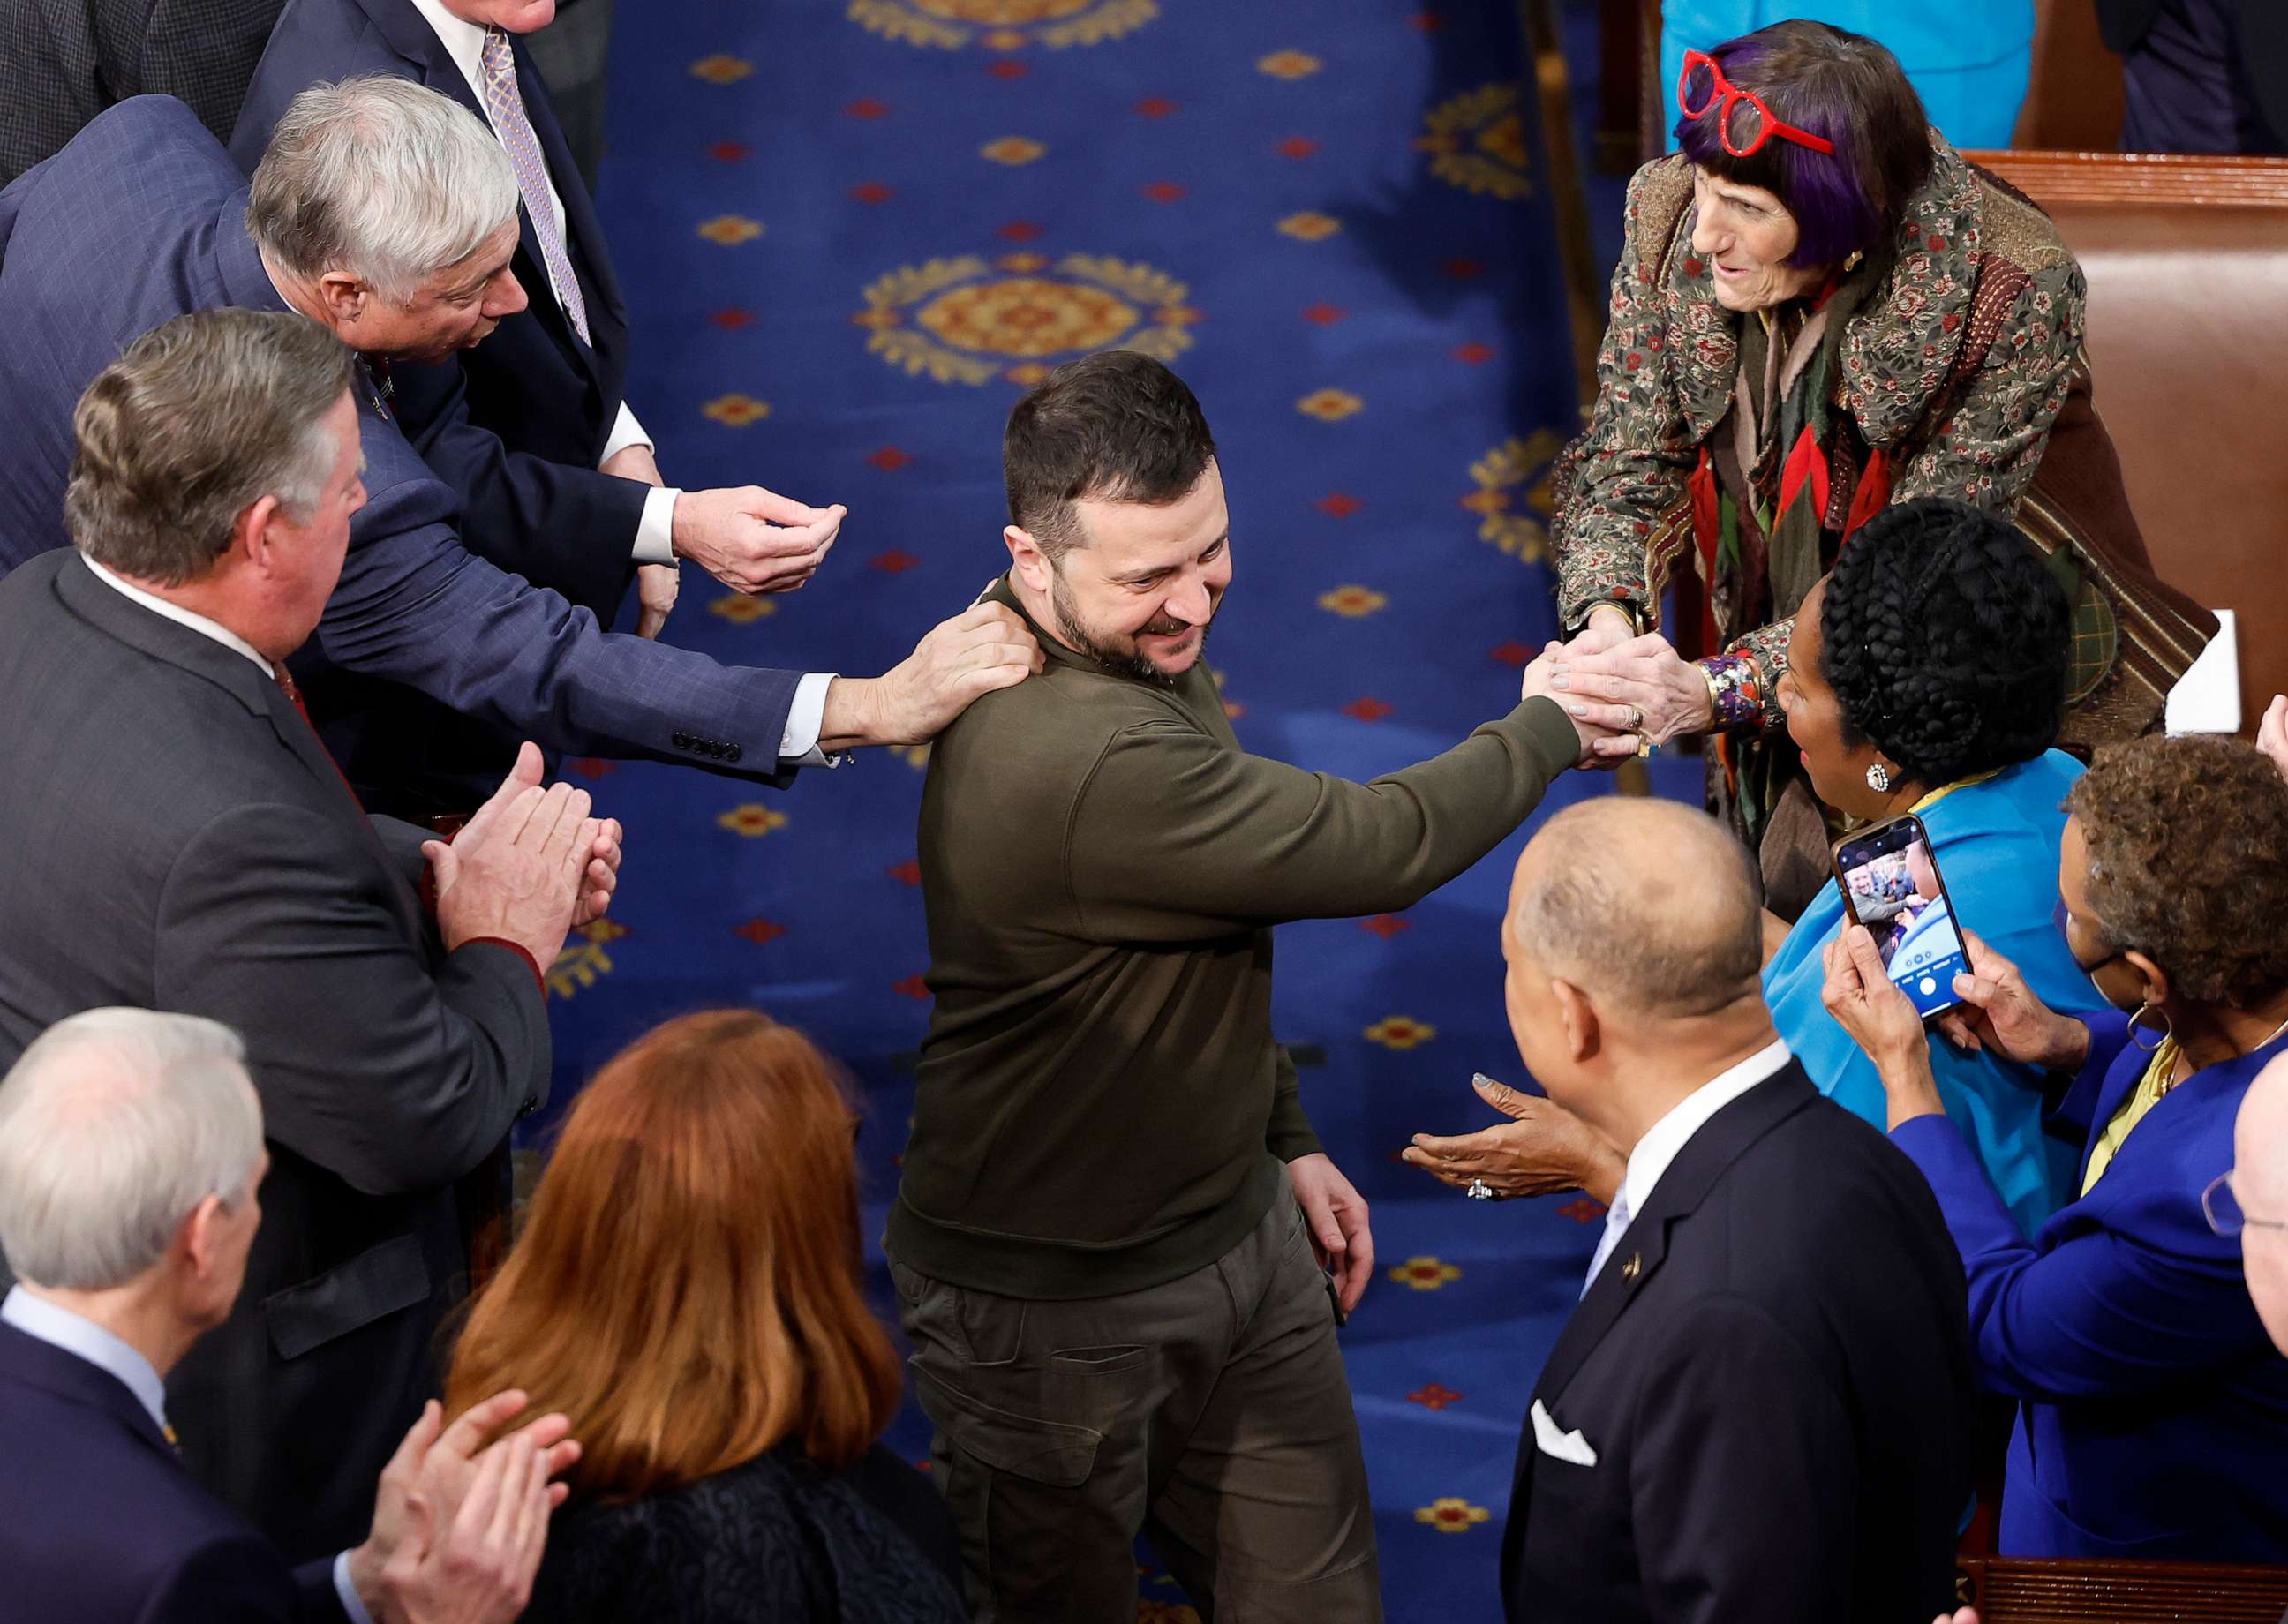 PHOTO: President of Ukraine Volodymyr Zelensky greets lawmakers as he arrives to addresses a joint meeting of Congress in the House Chamber of the U.S. Capitol on Dec. 21, 2022, in Washington, D.C.